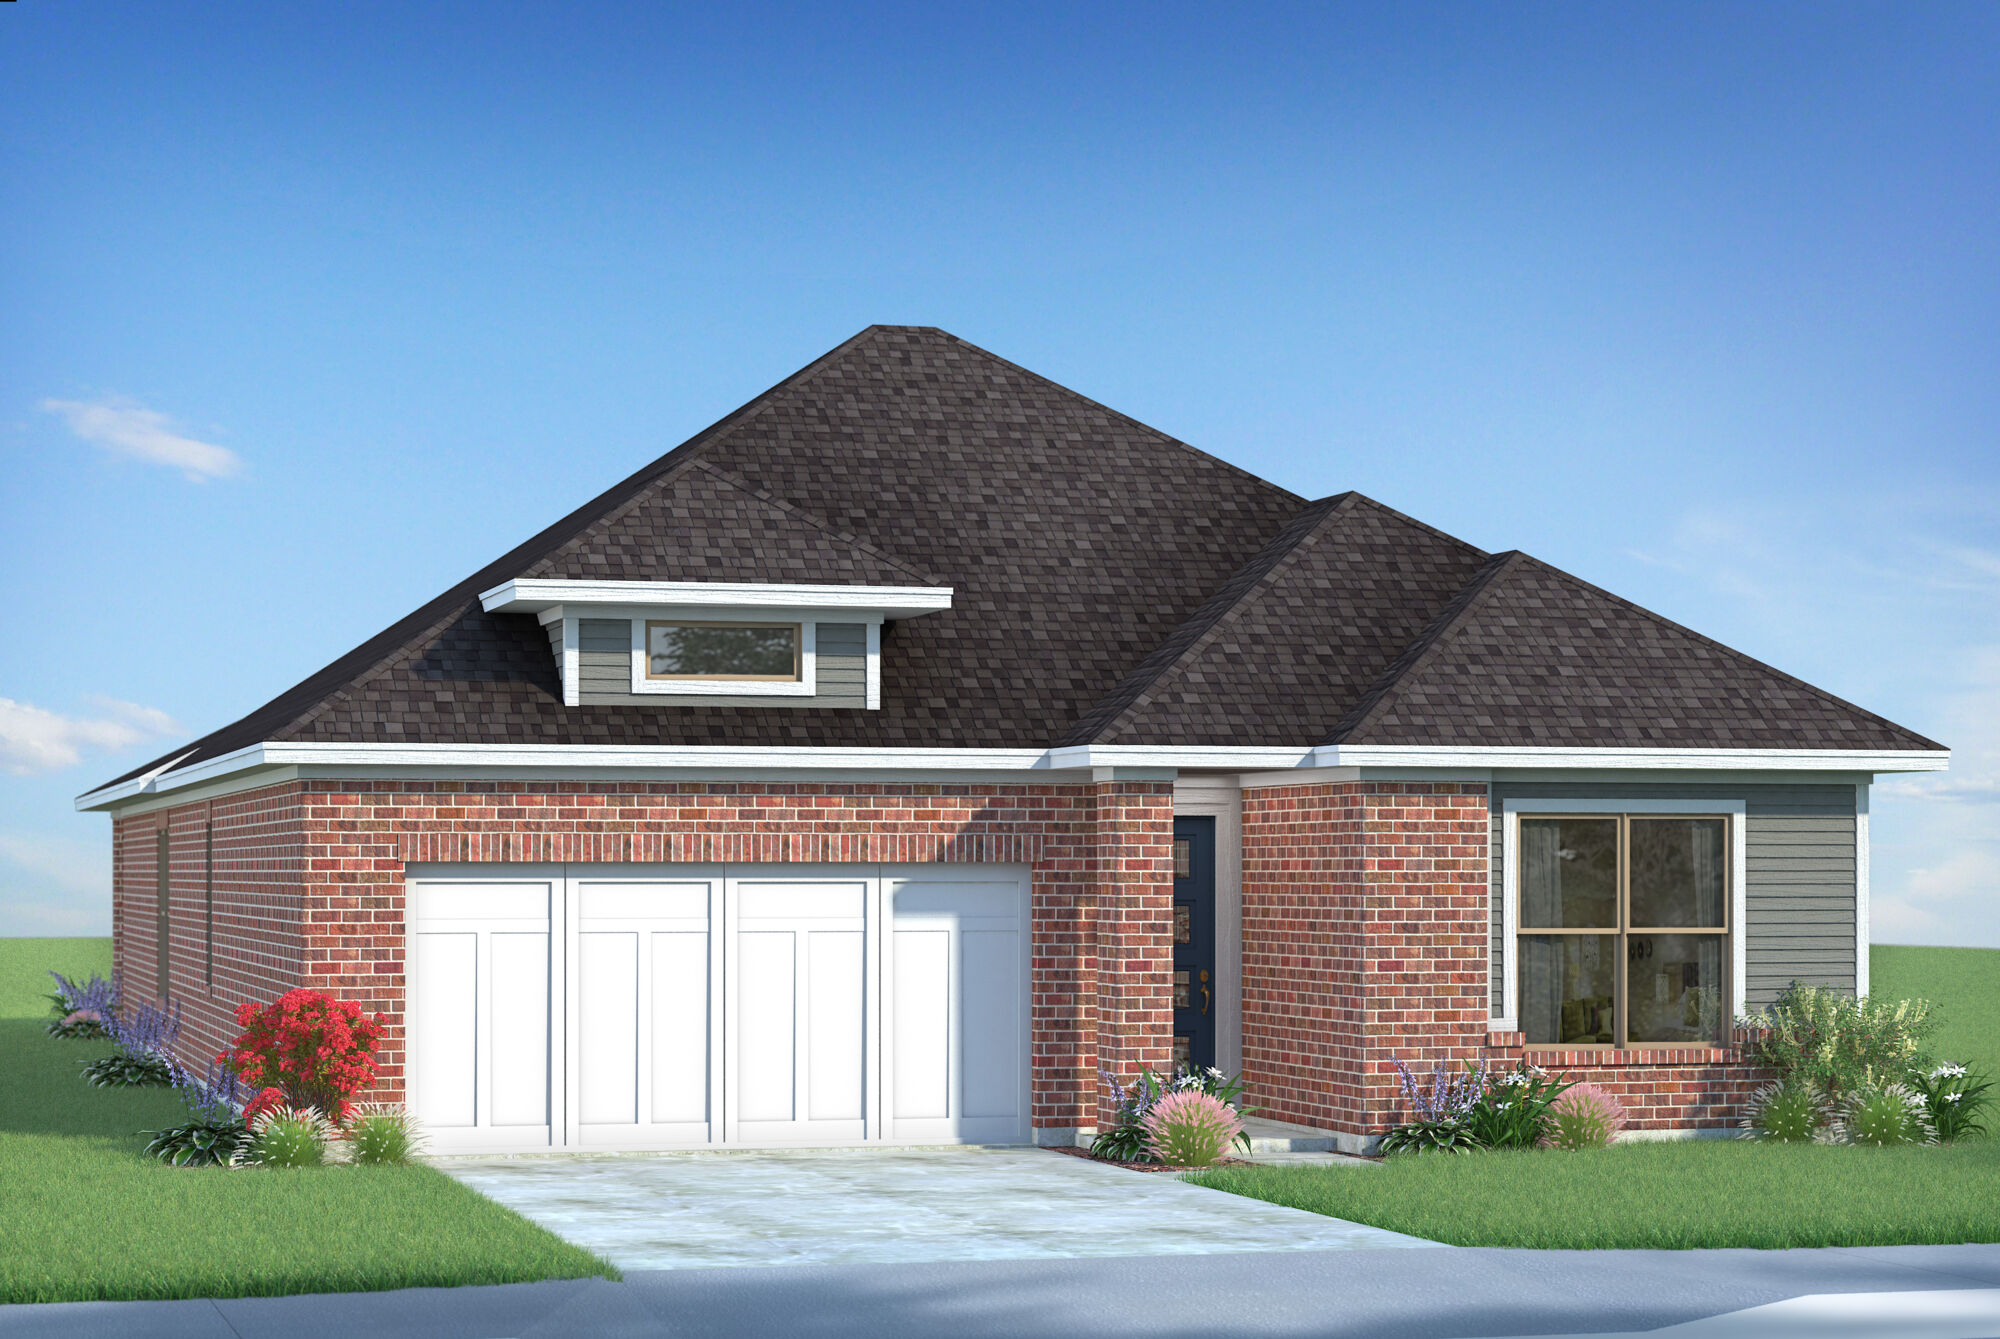  Elevation Front with garage, window and exterior brick